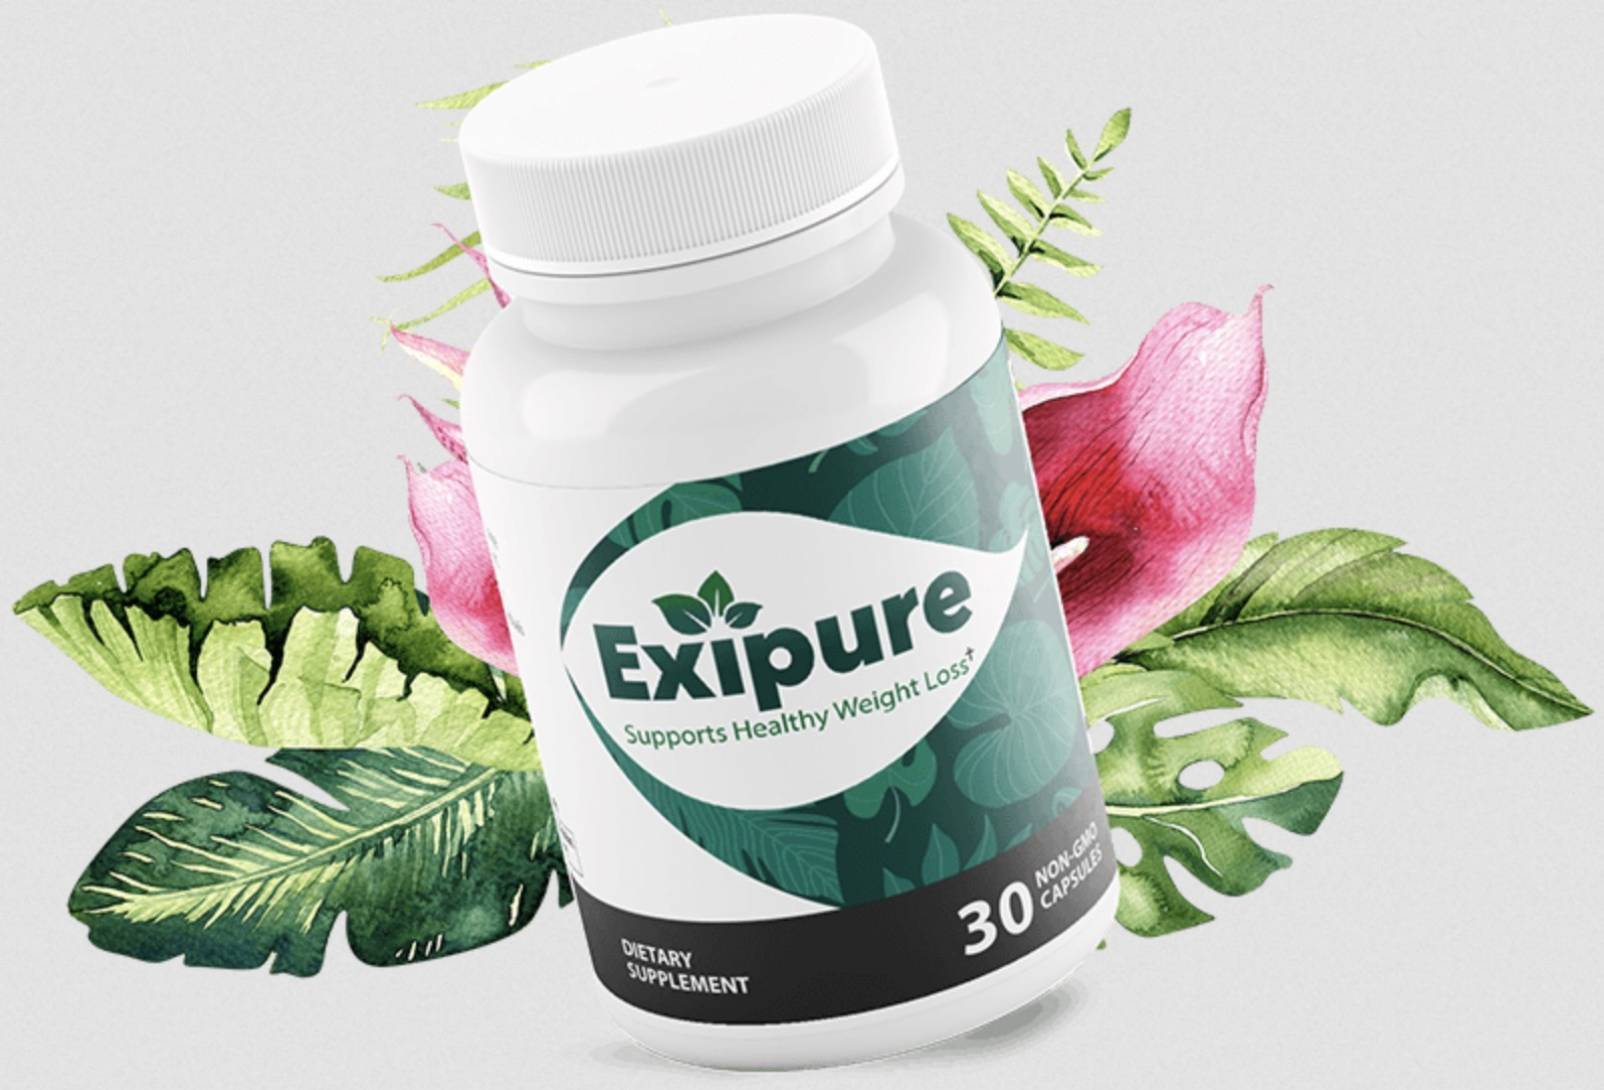 Exipure Customer Service Number